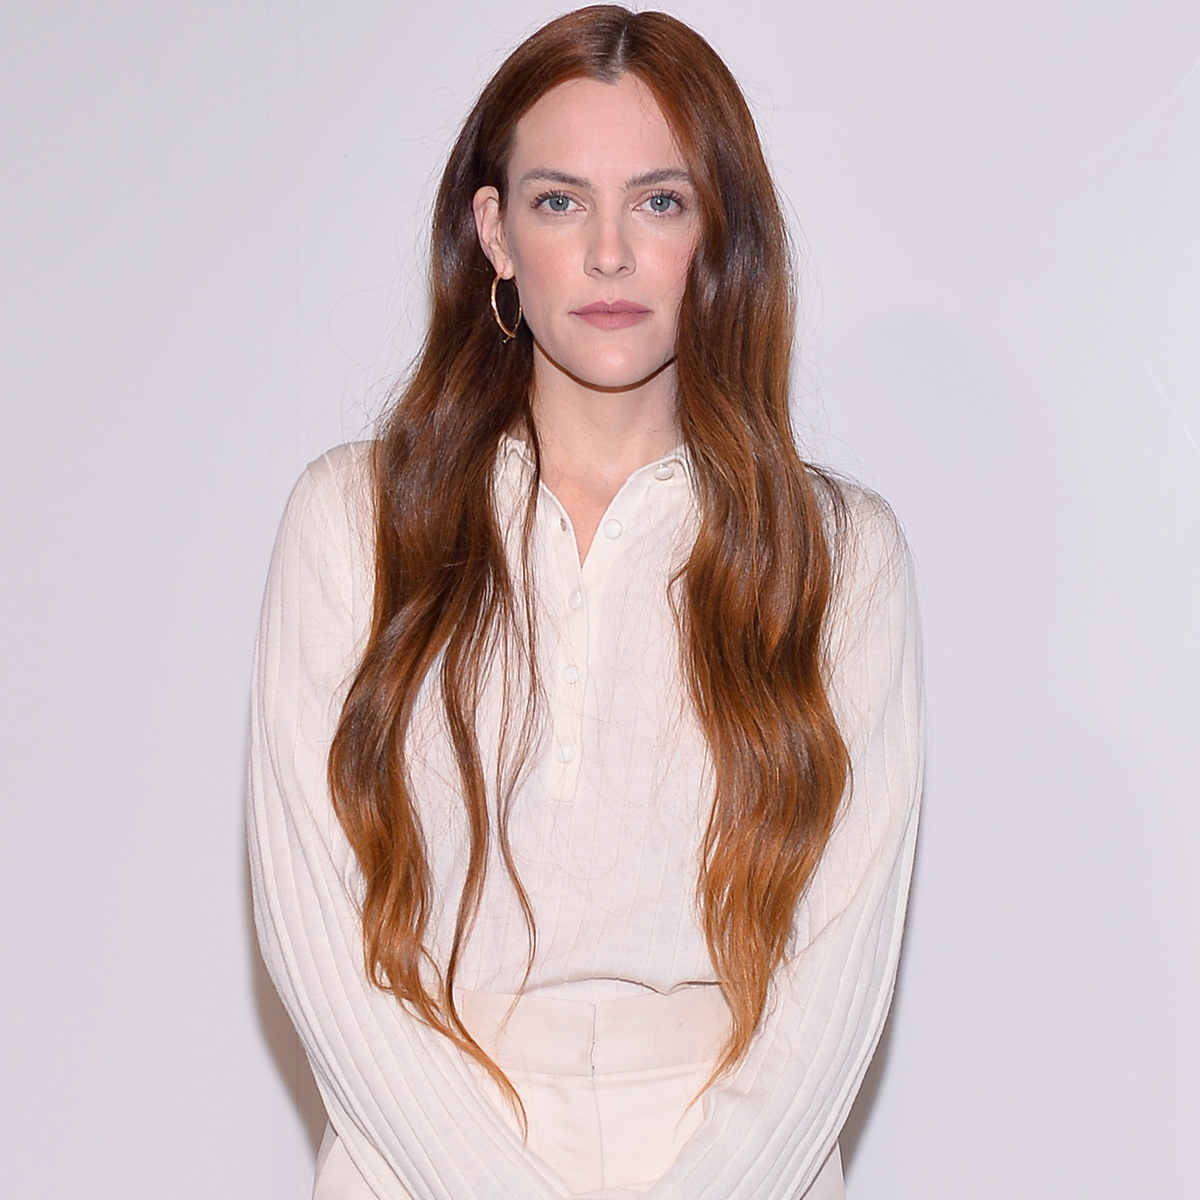 Riley Keough Slams “Fraudulent” Attempt to Sell…